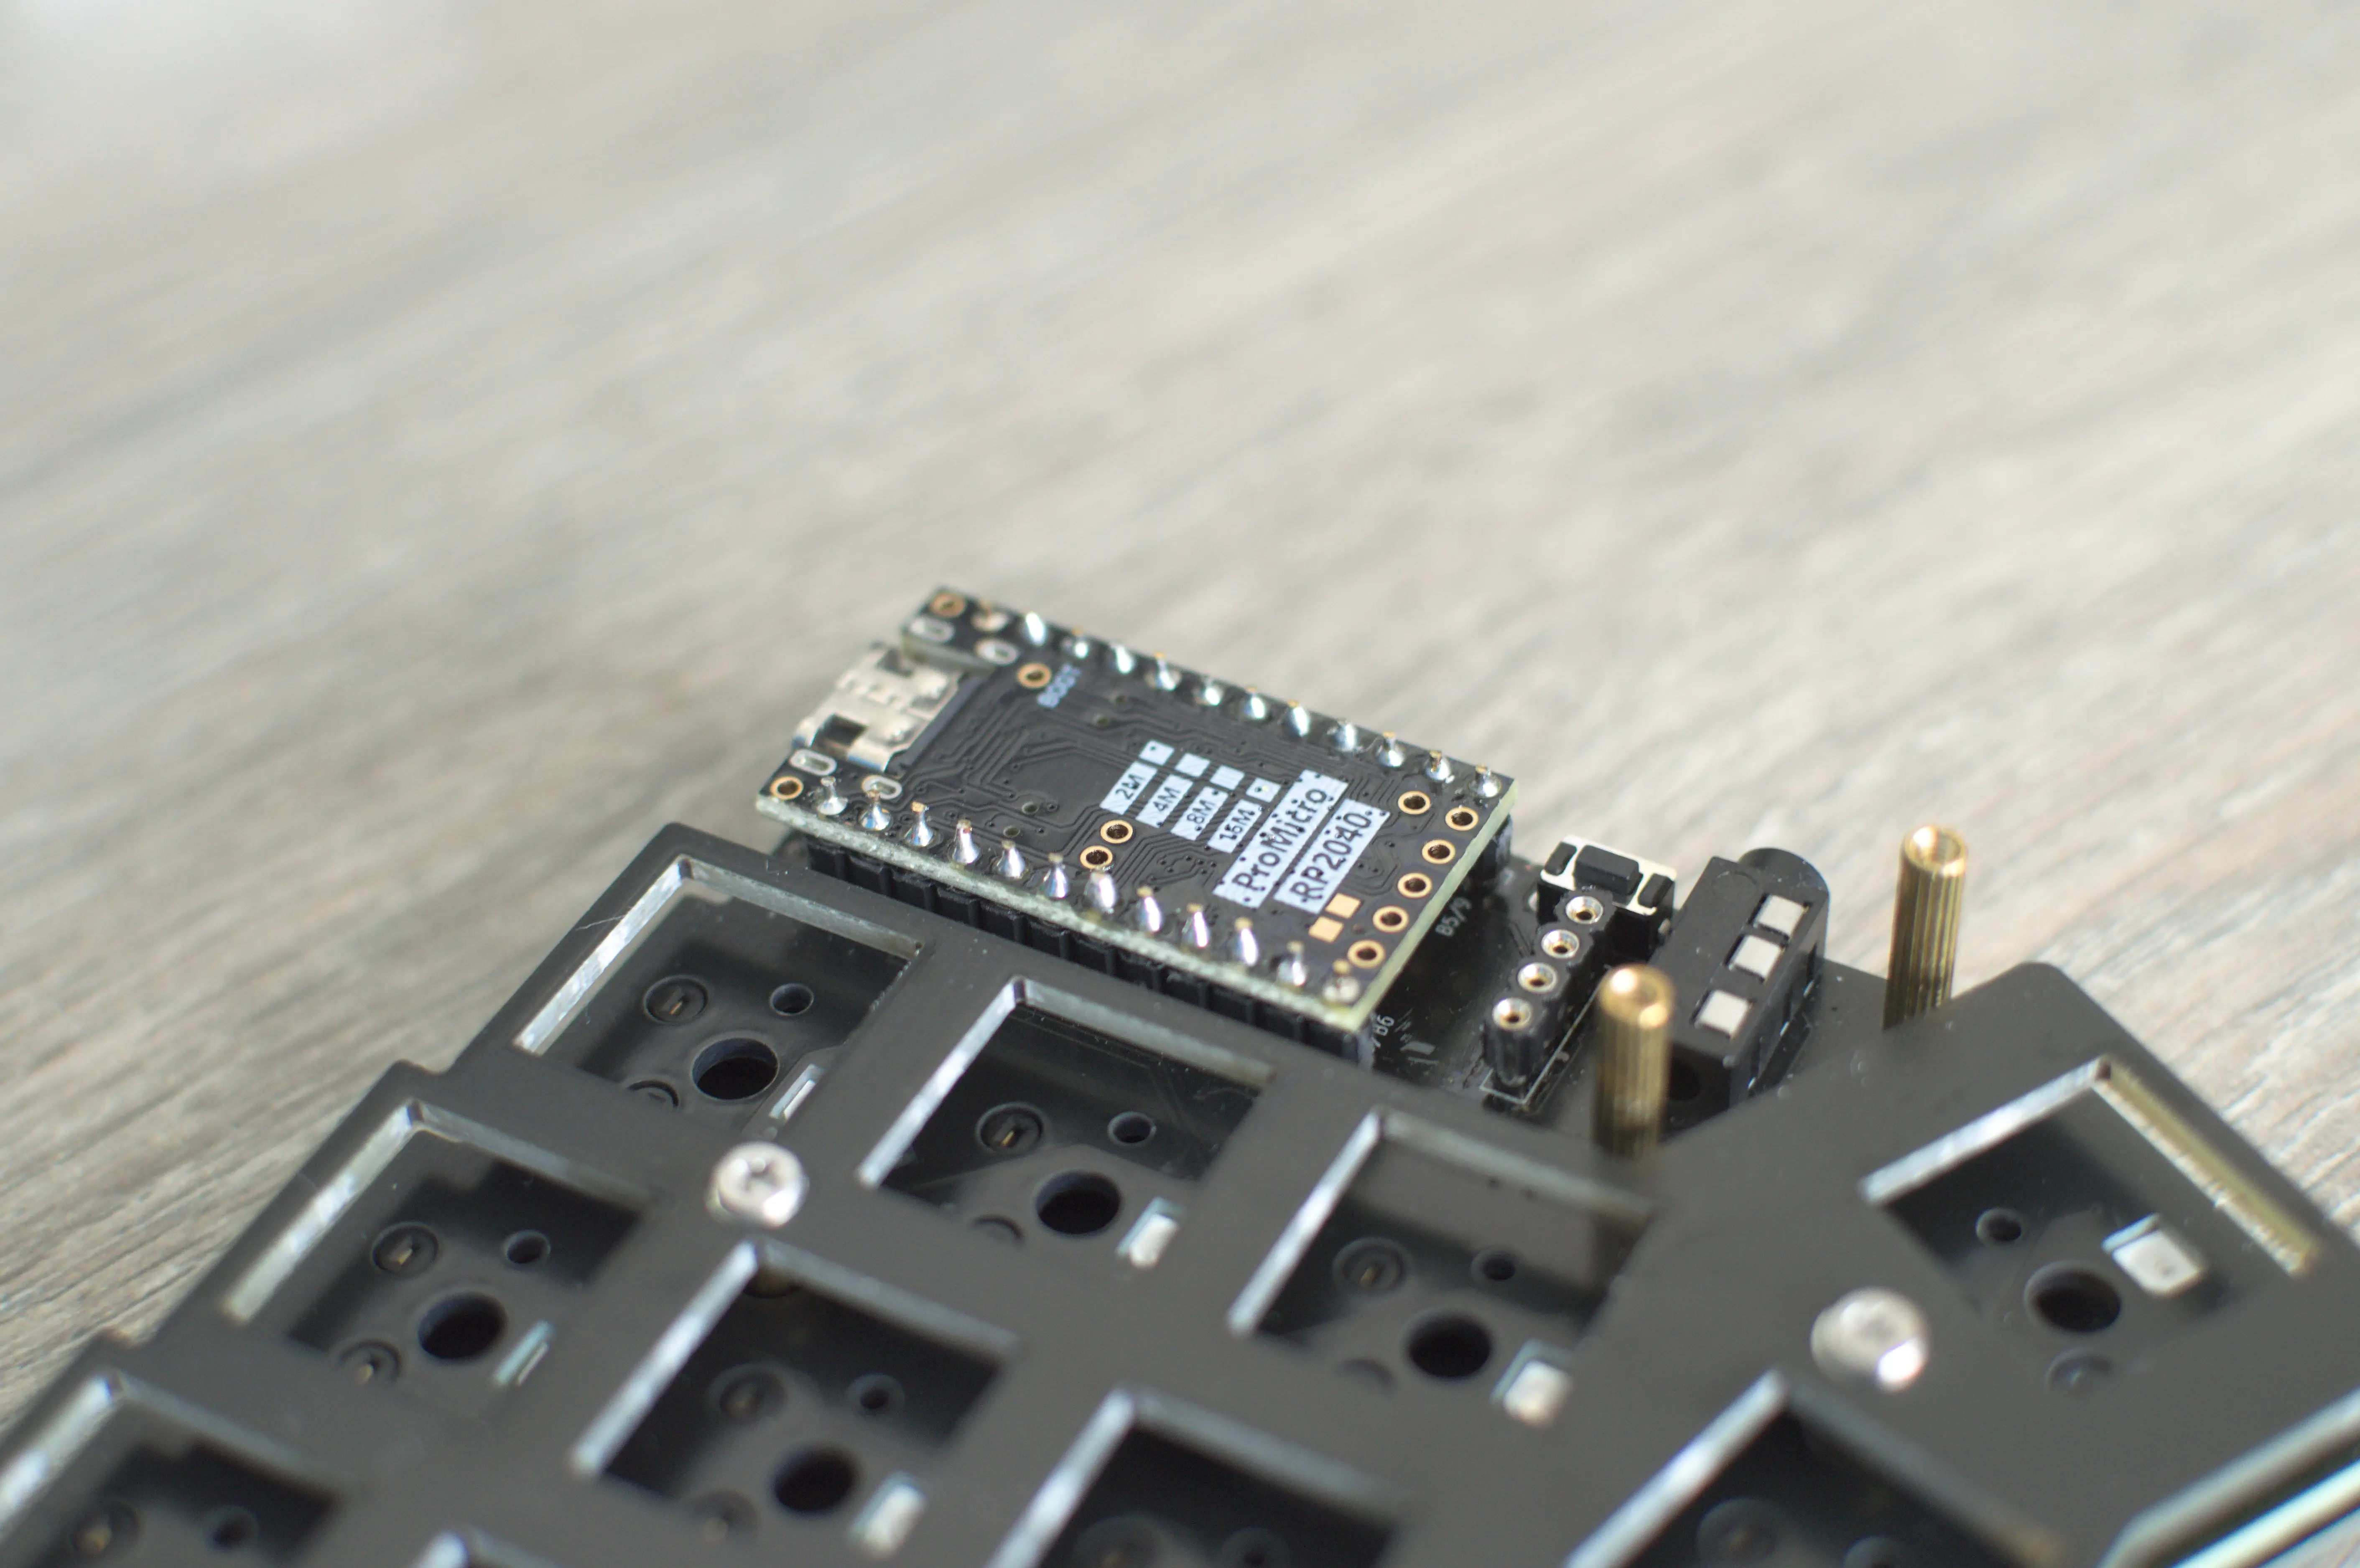 Soldered the pins on the microcontroller